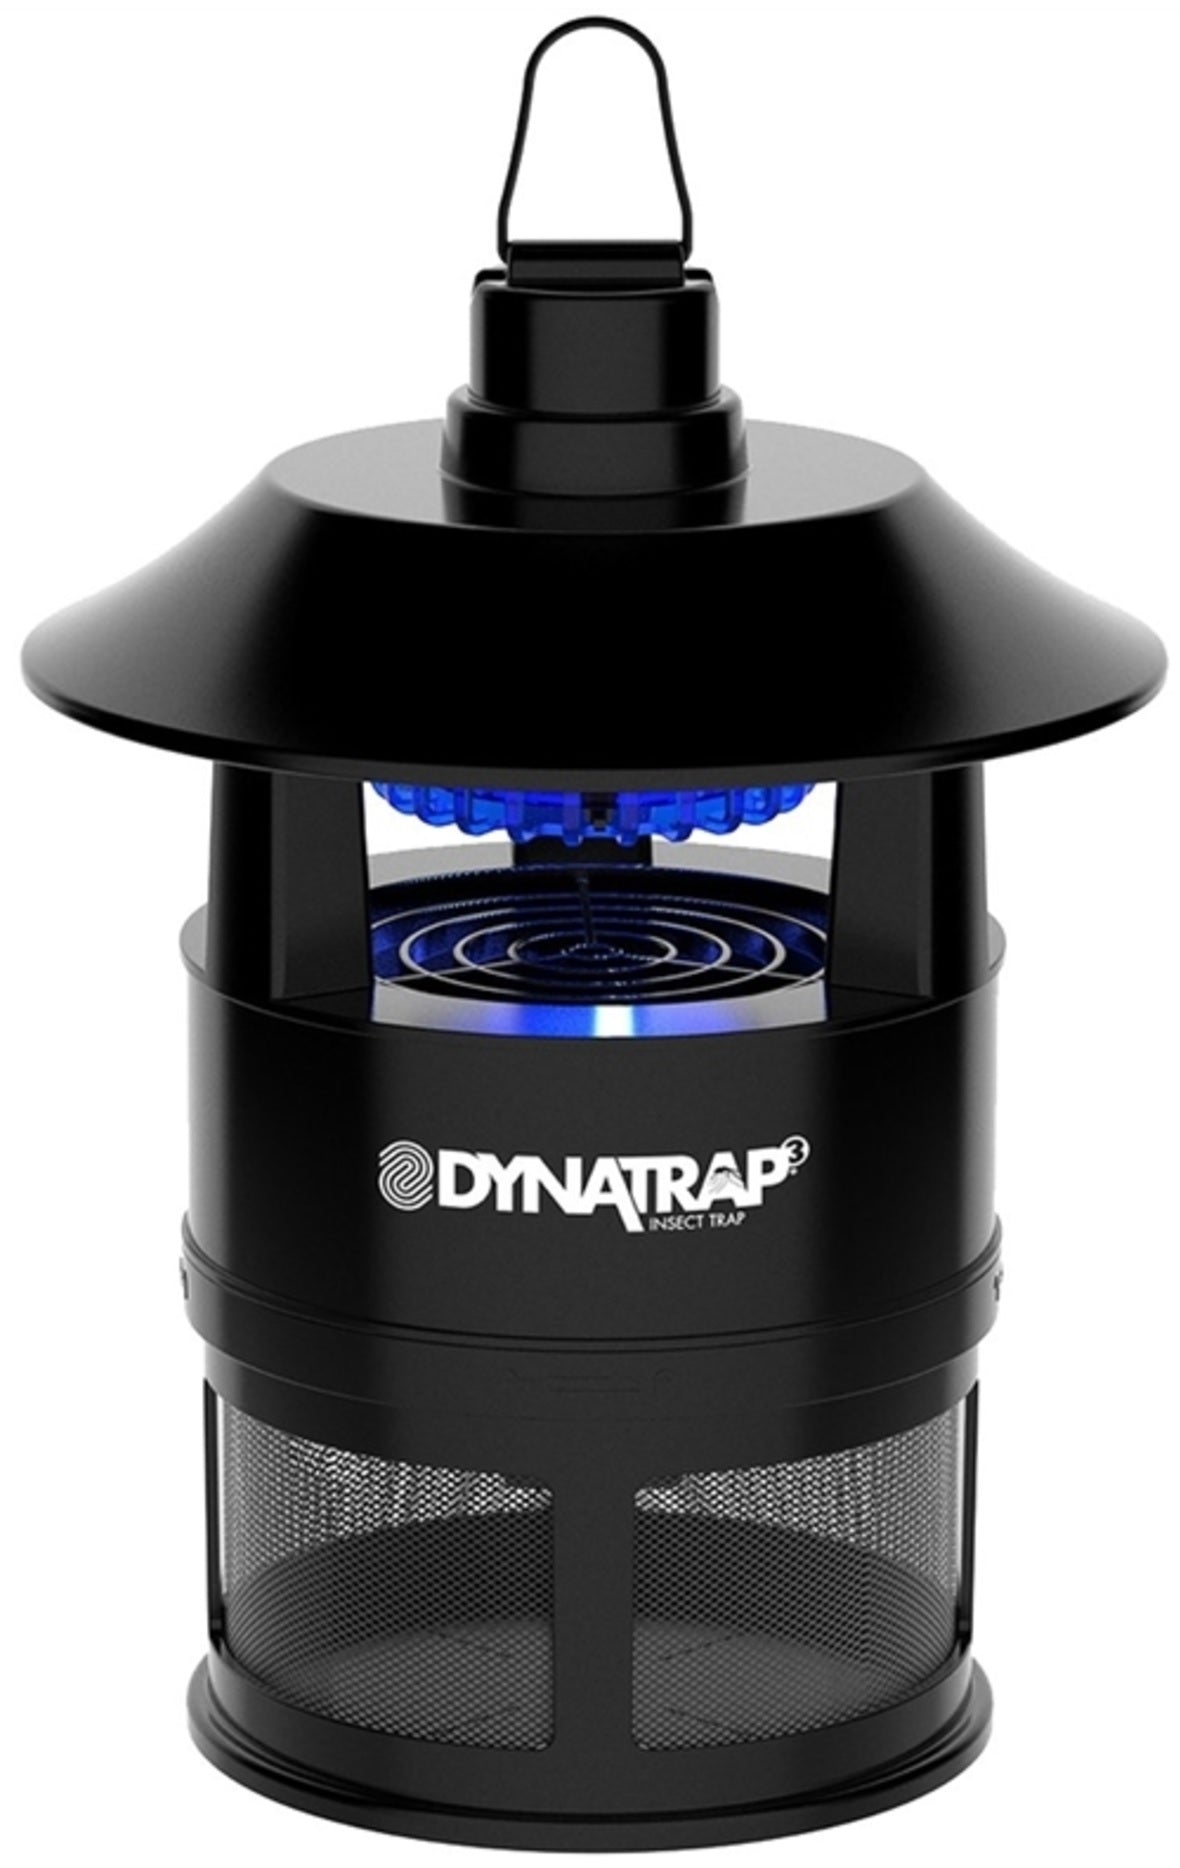 DynaTrap DT160 Outdoor Insect Trap, 1/4 Acre